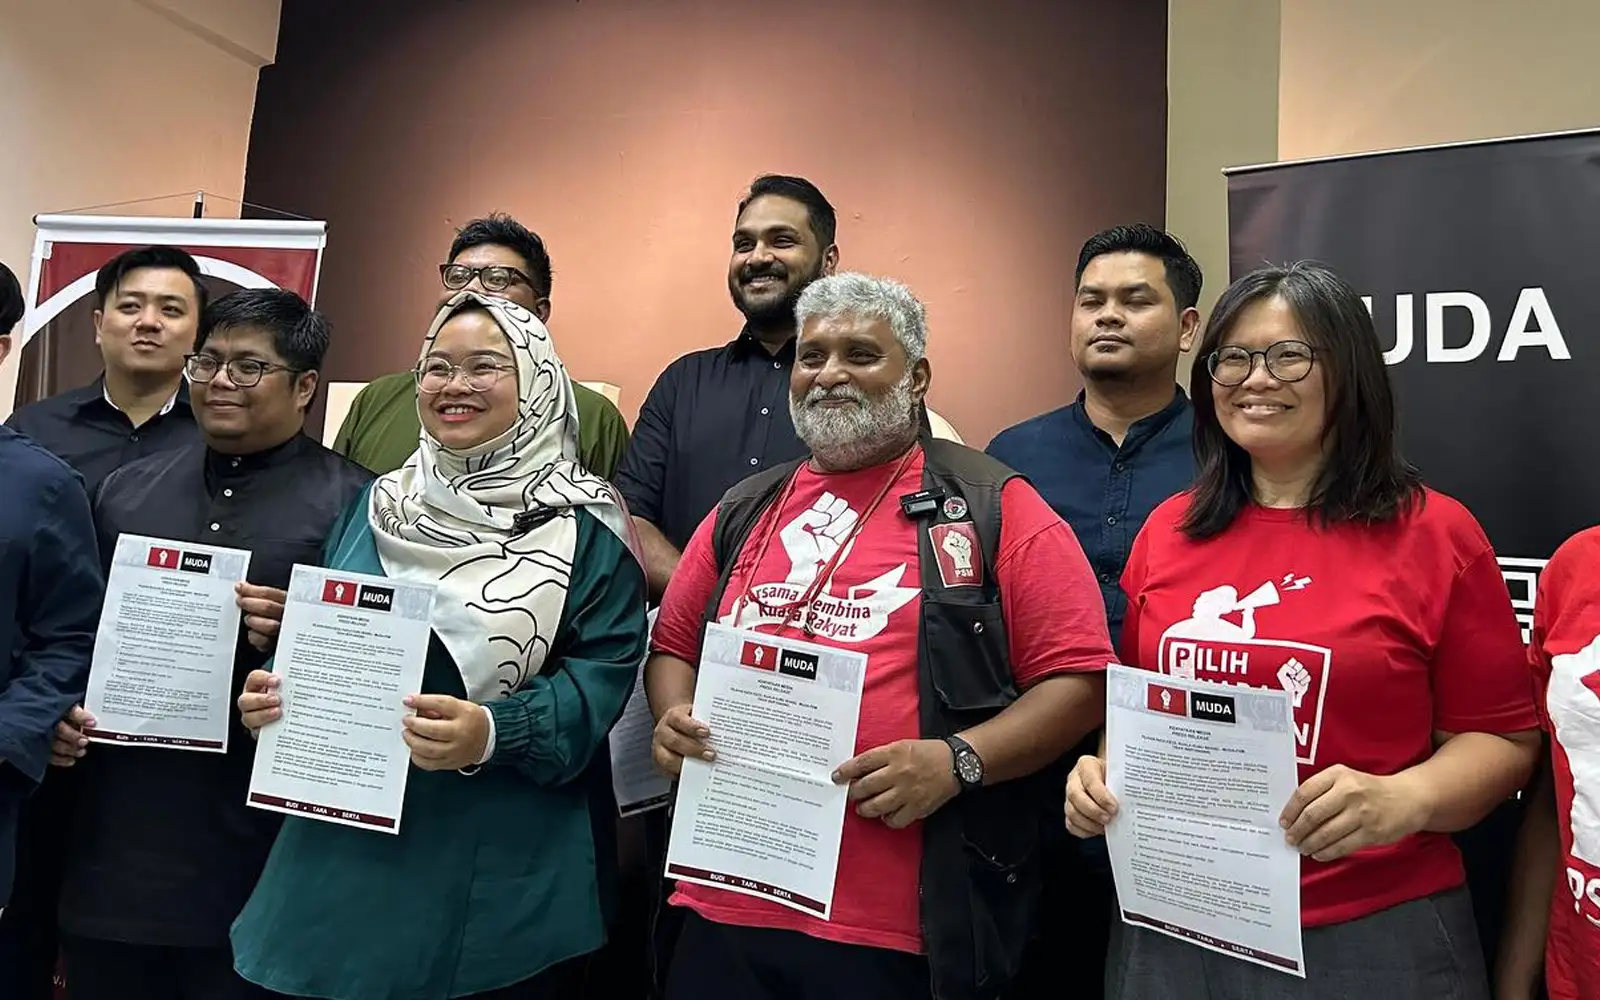 muda, psm being practical to skip kkb poll, say analysts